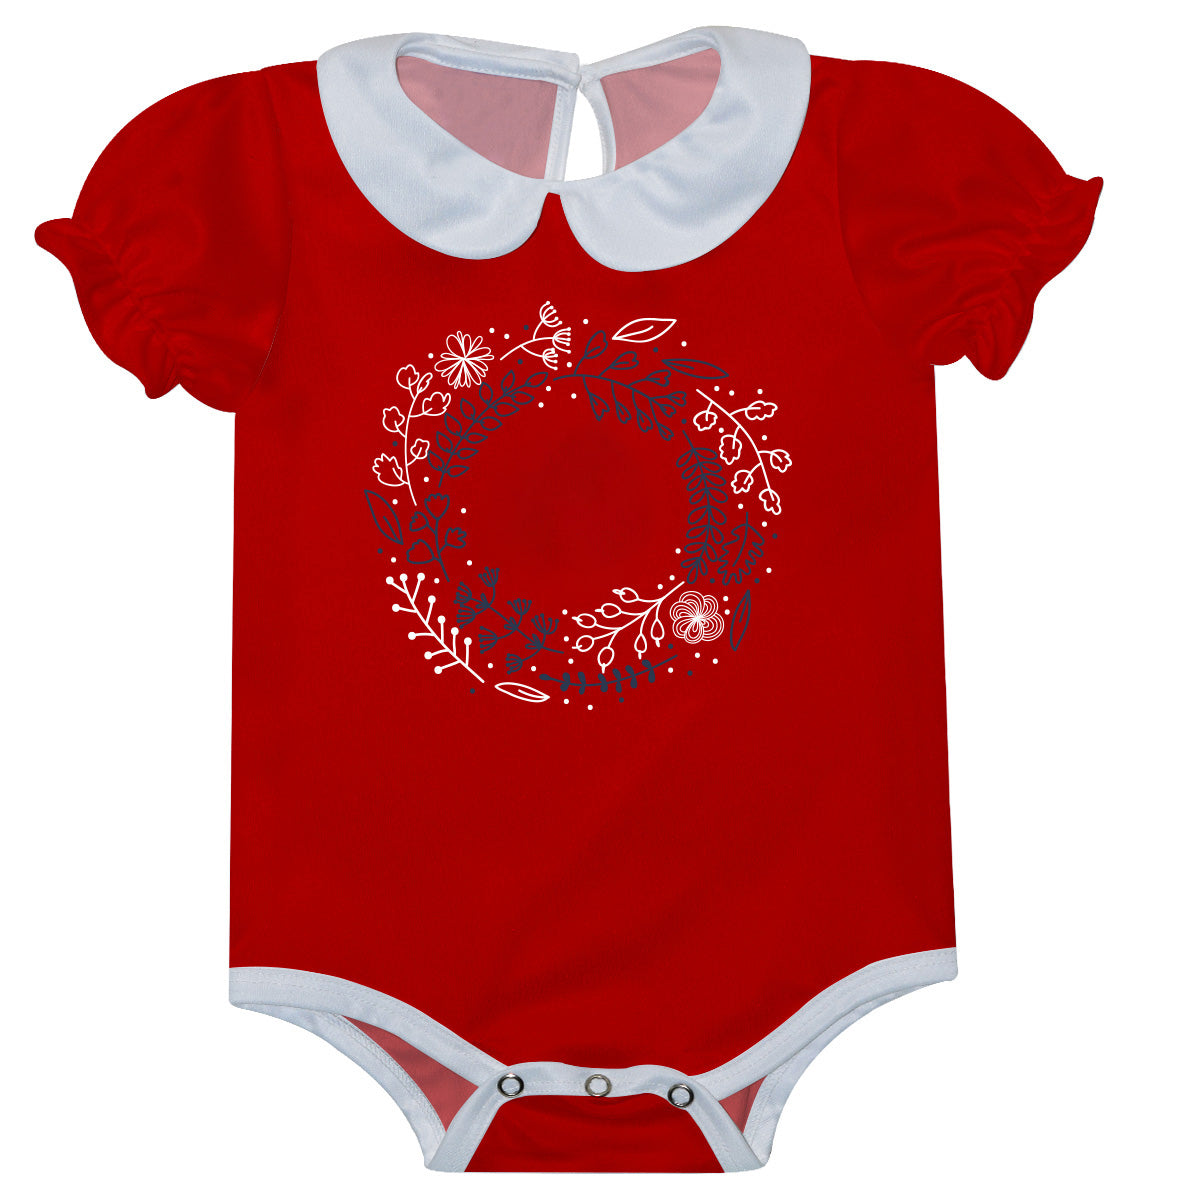 Girls red and white wreath onesie with monogram - Wimziy&Co.